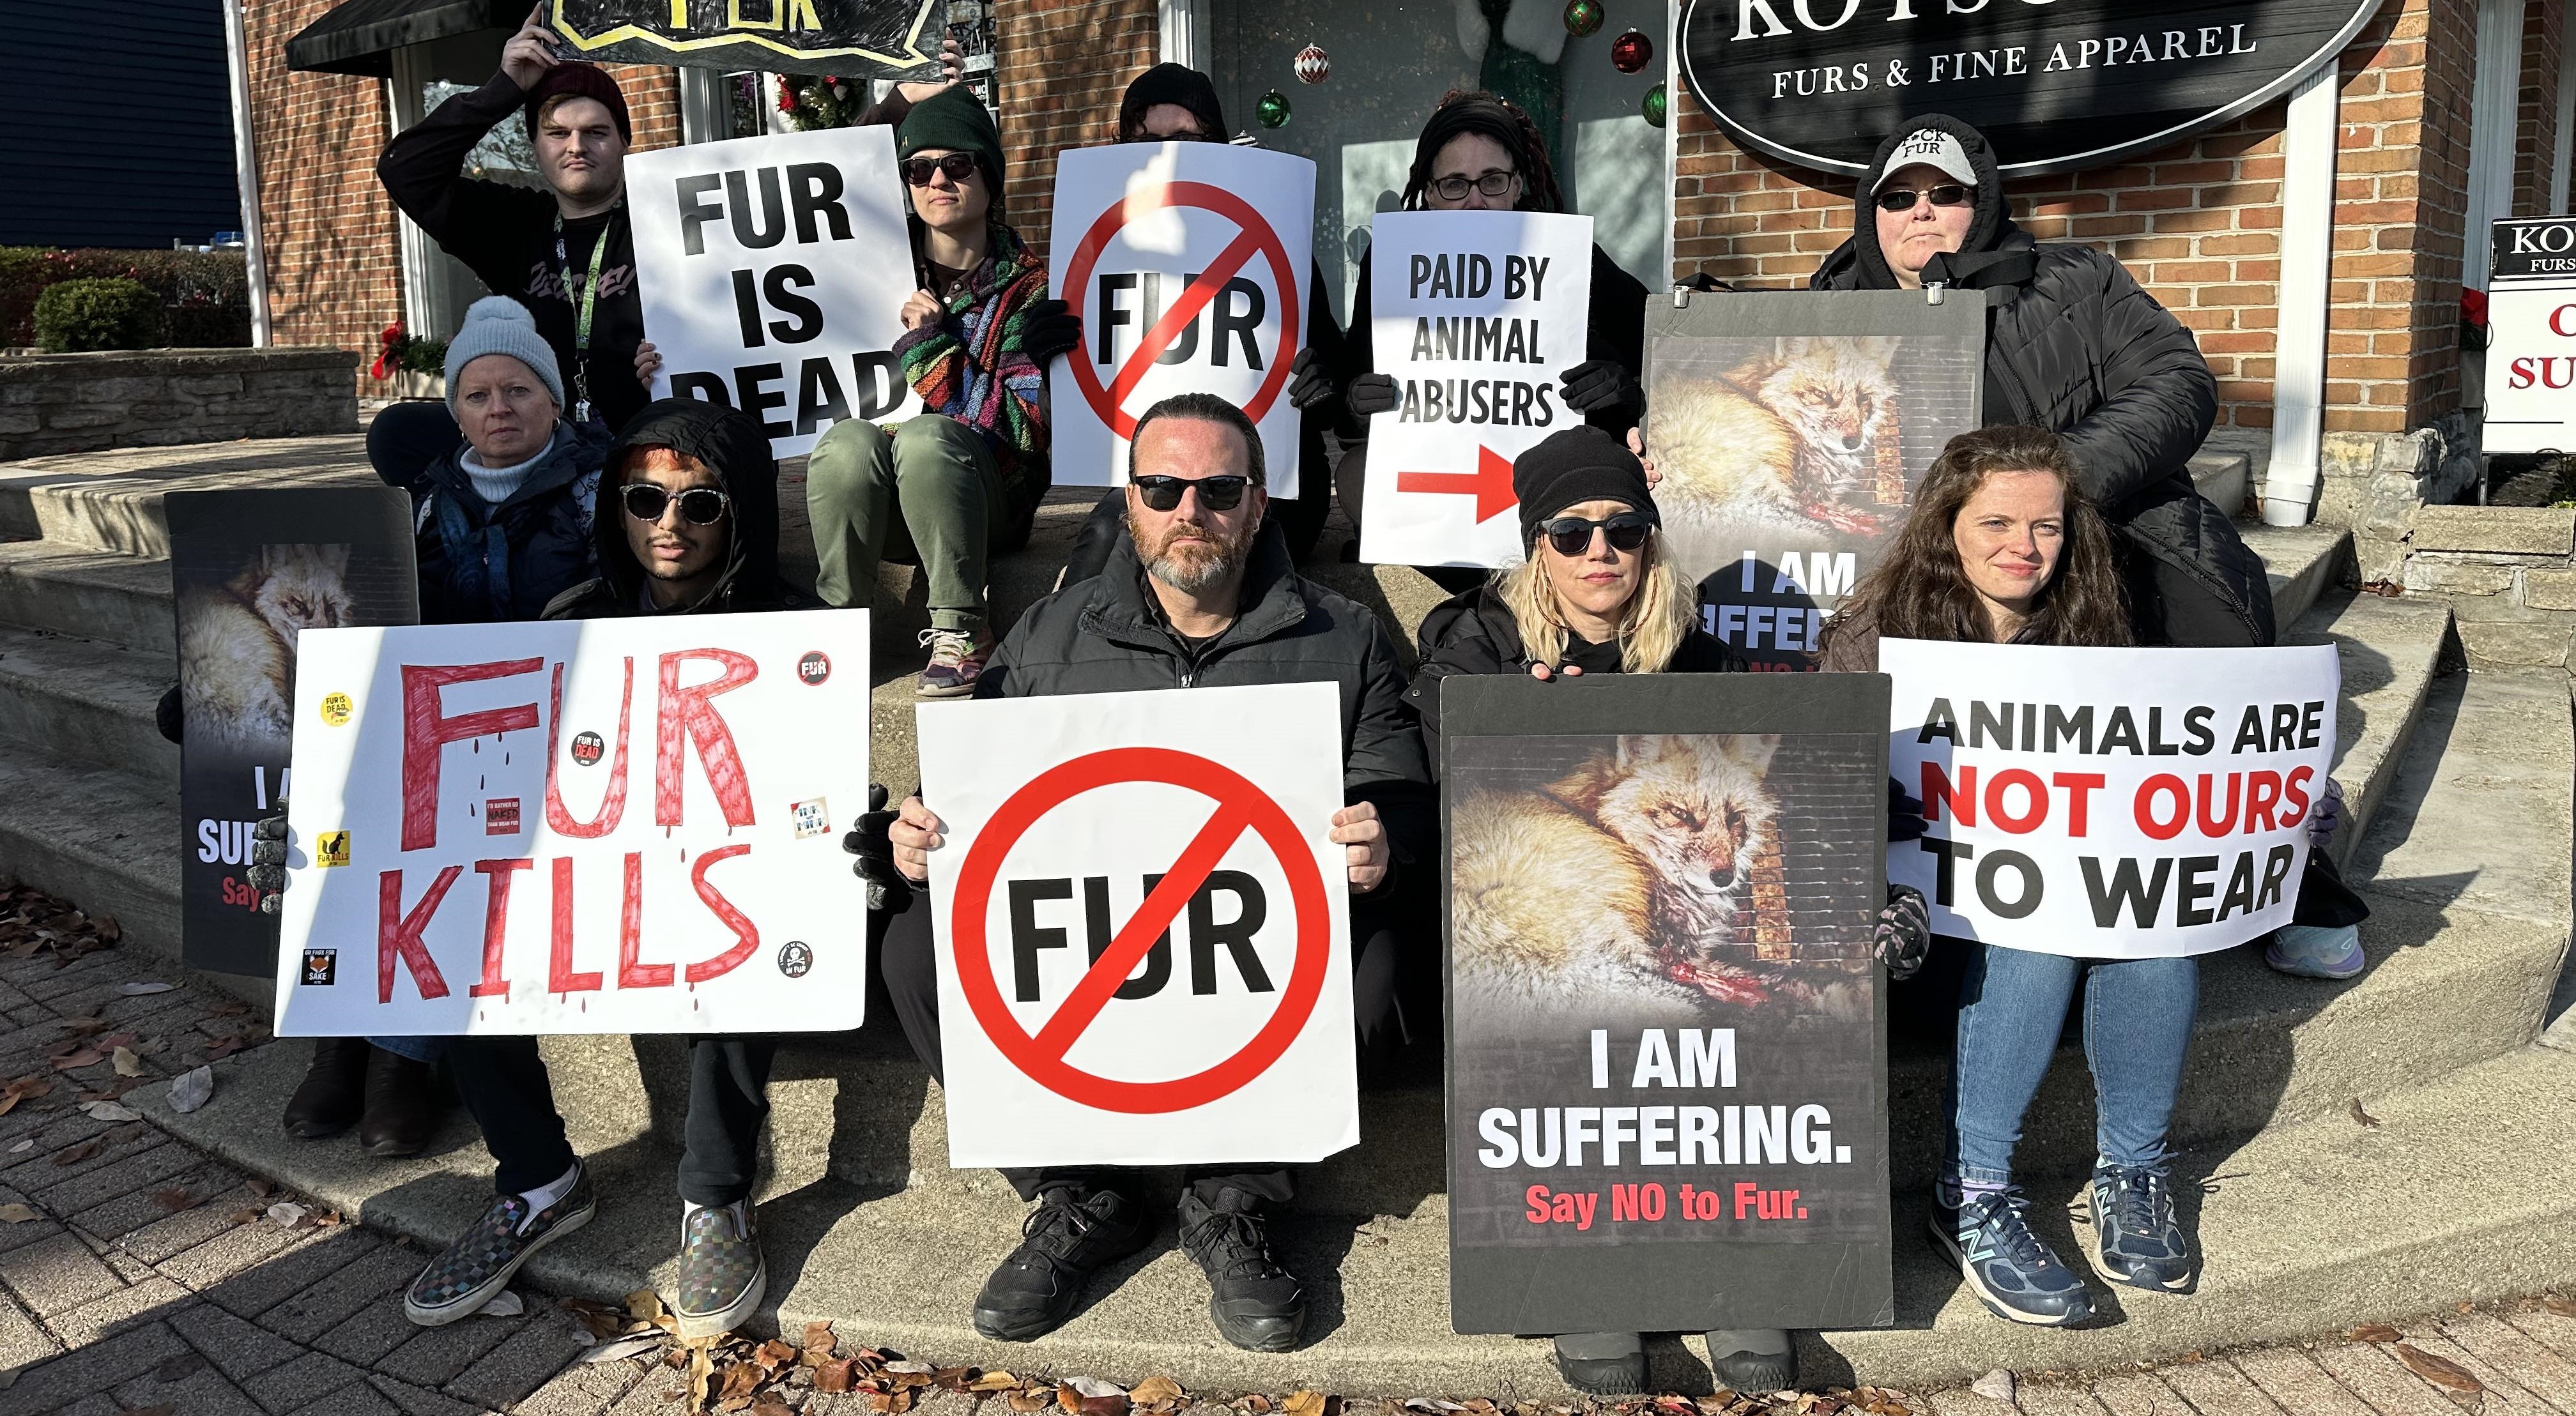 Fur protesters with signs standing outside a fur shop